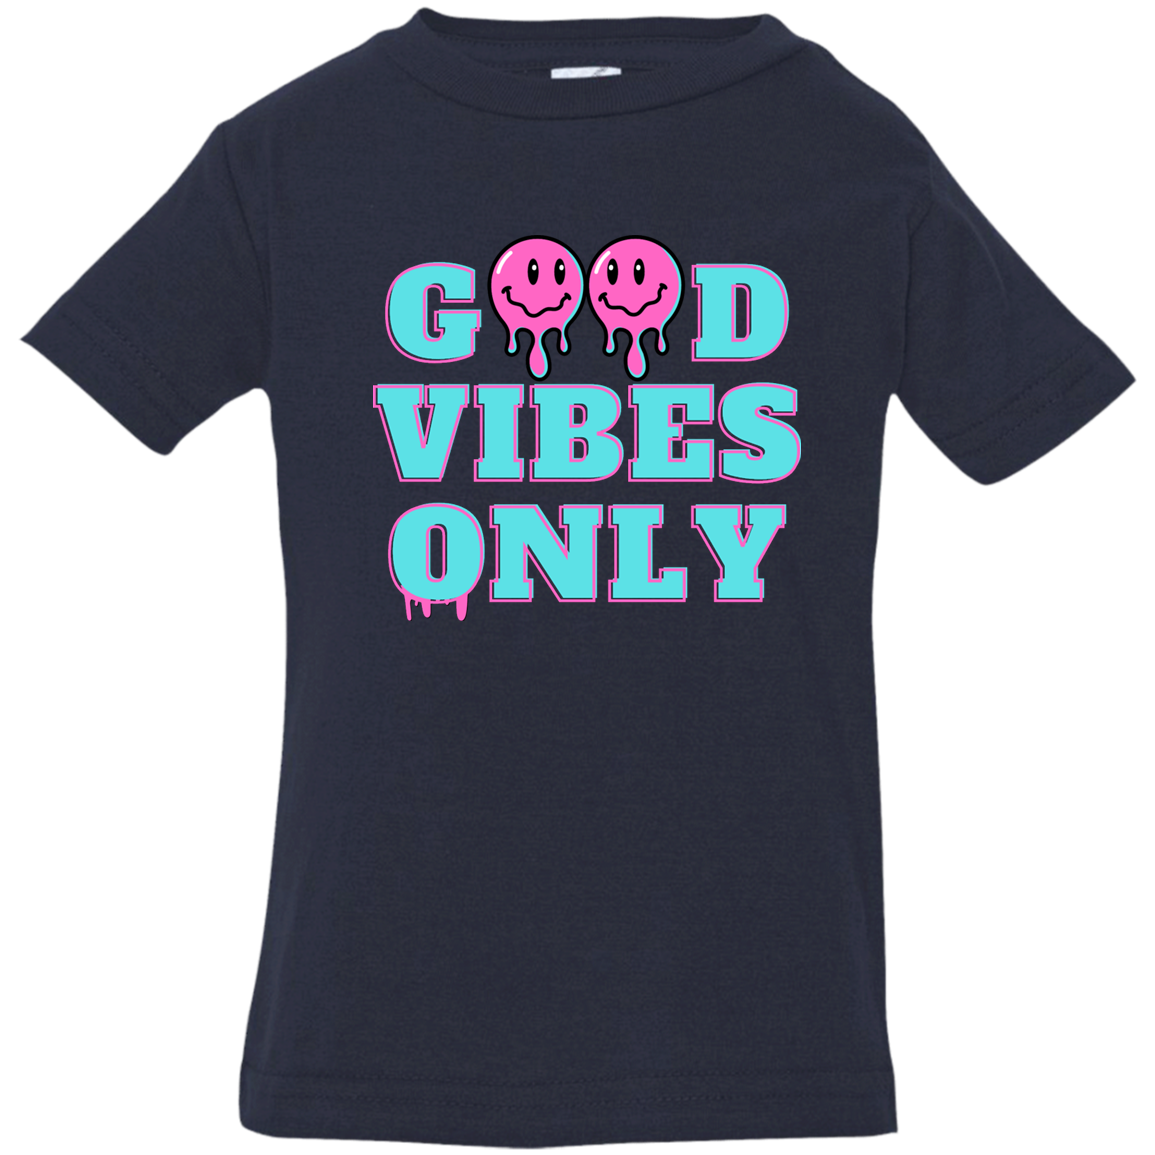 Good Vibes Only - 6, 12, 18, & 24 Month Unisex Jersey T-Shirt